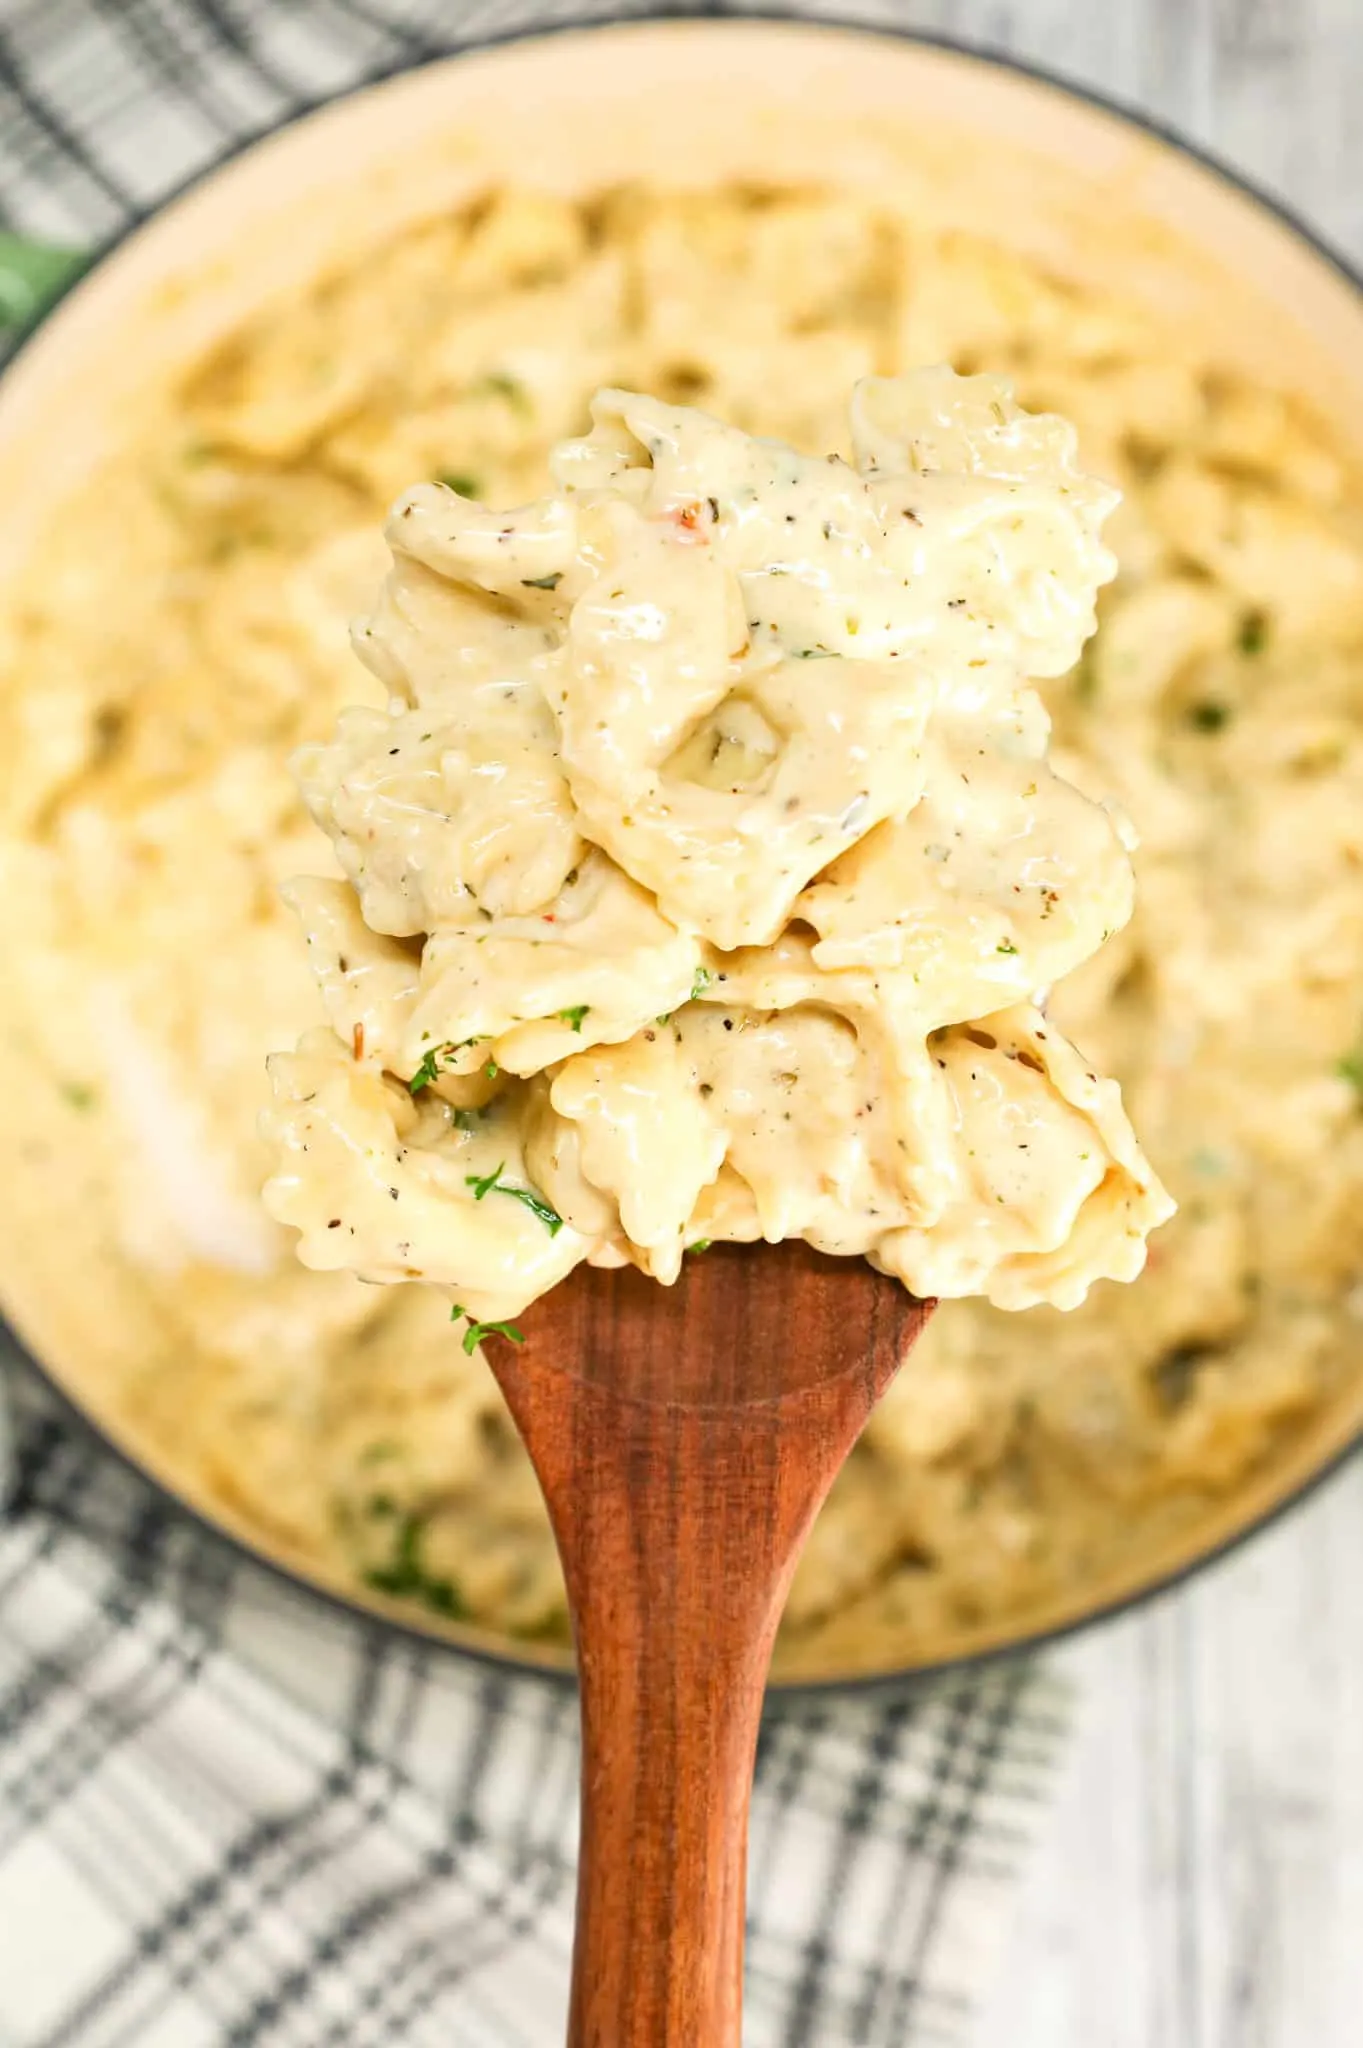 Tortellini Alfredo is a simple and delicious pasta recipe with cheese tortellini all tossed in a creamy garlic parmesan sauce.